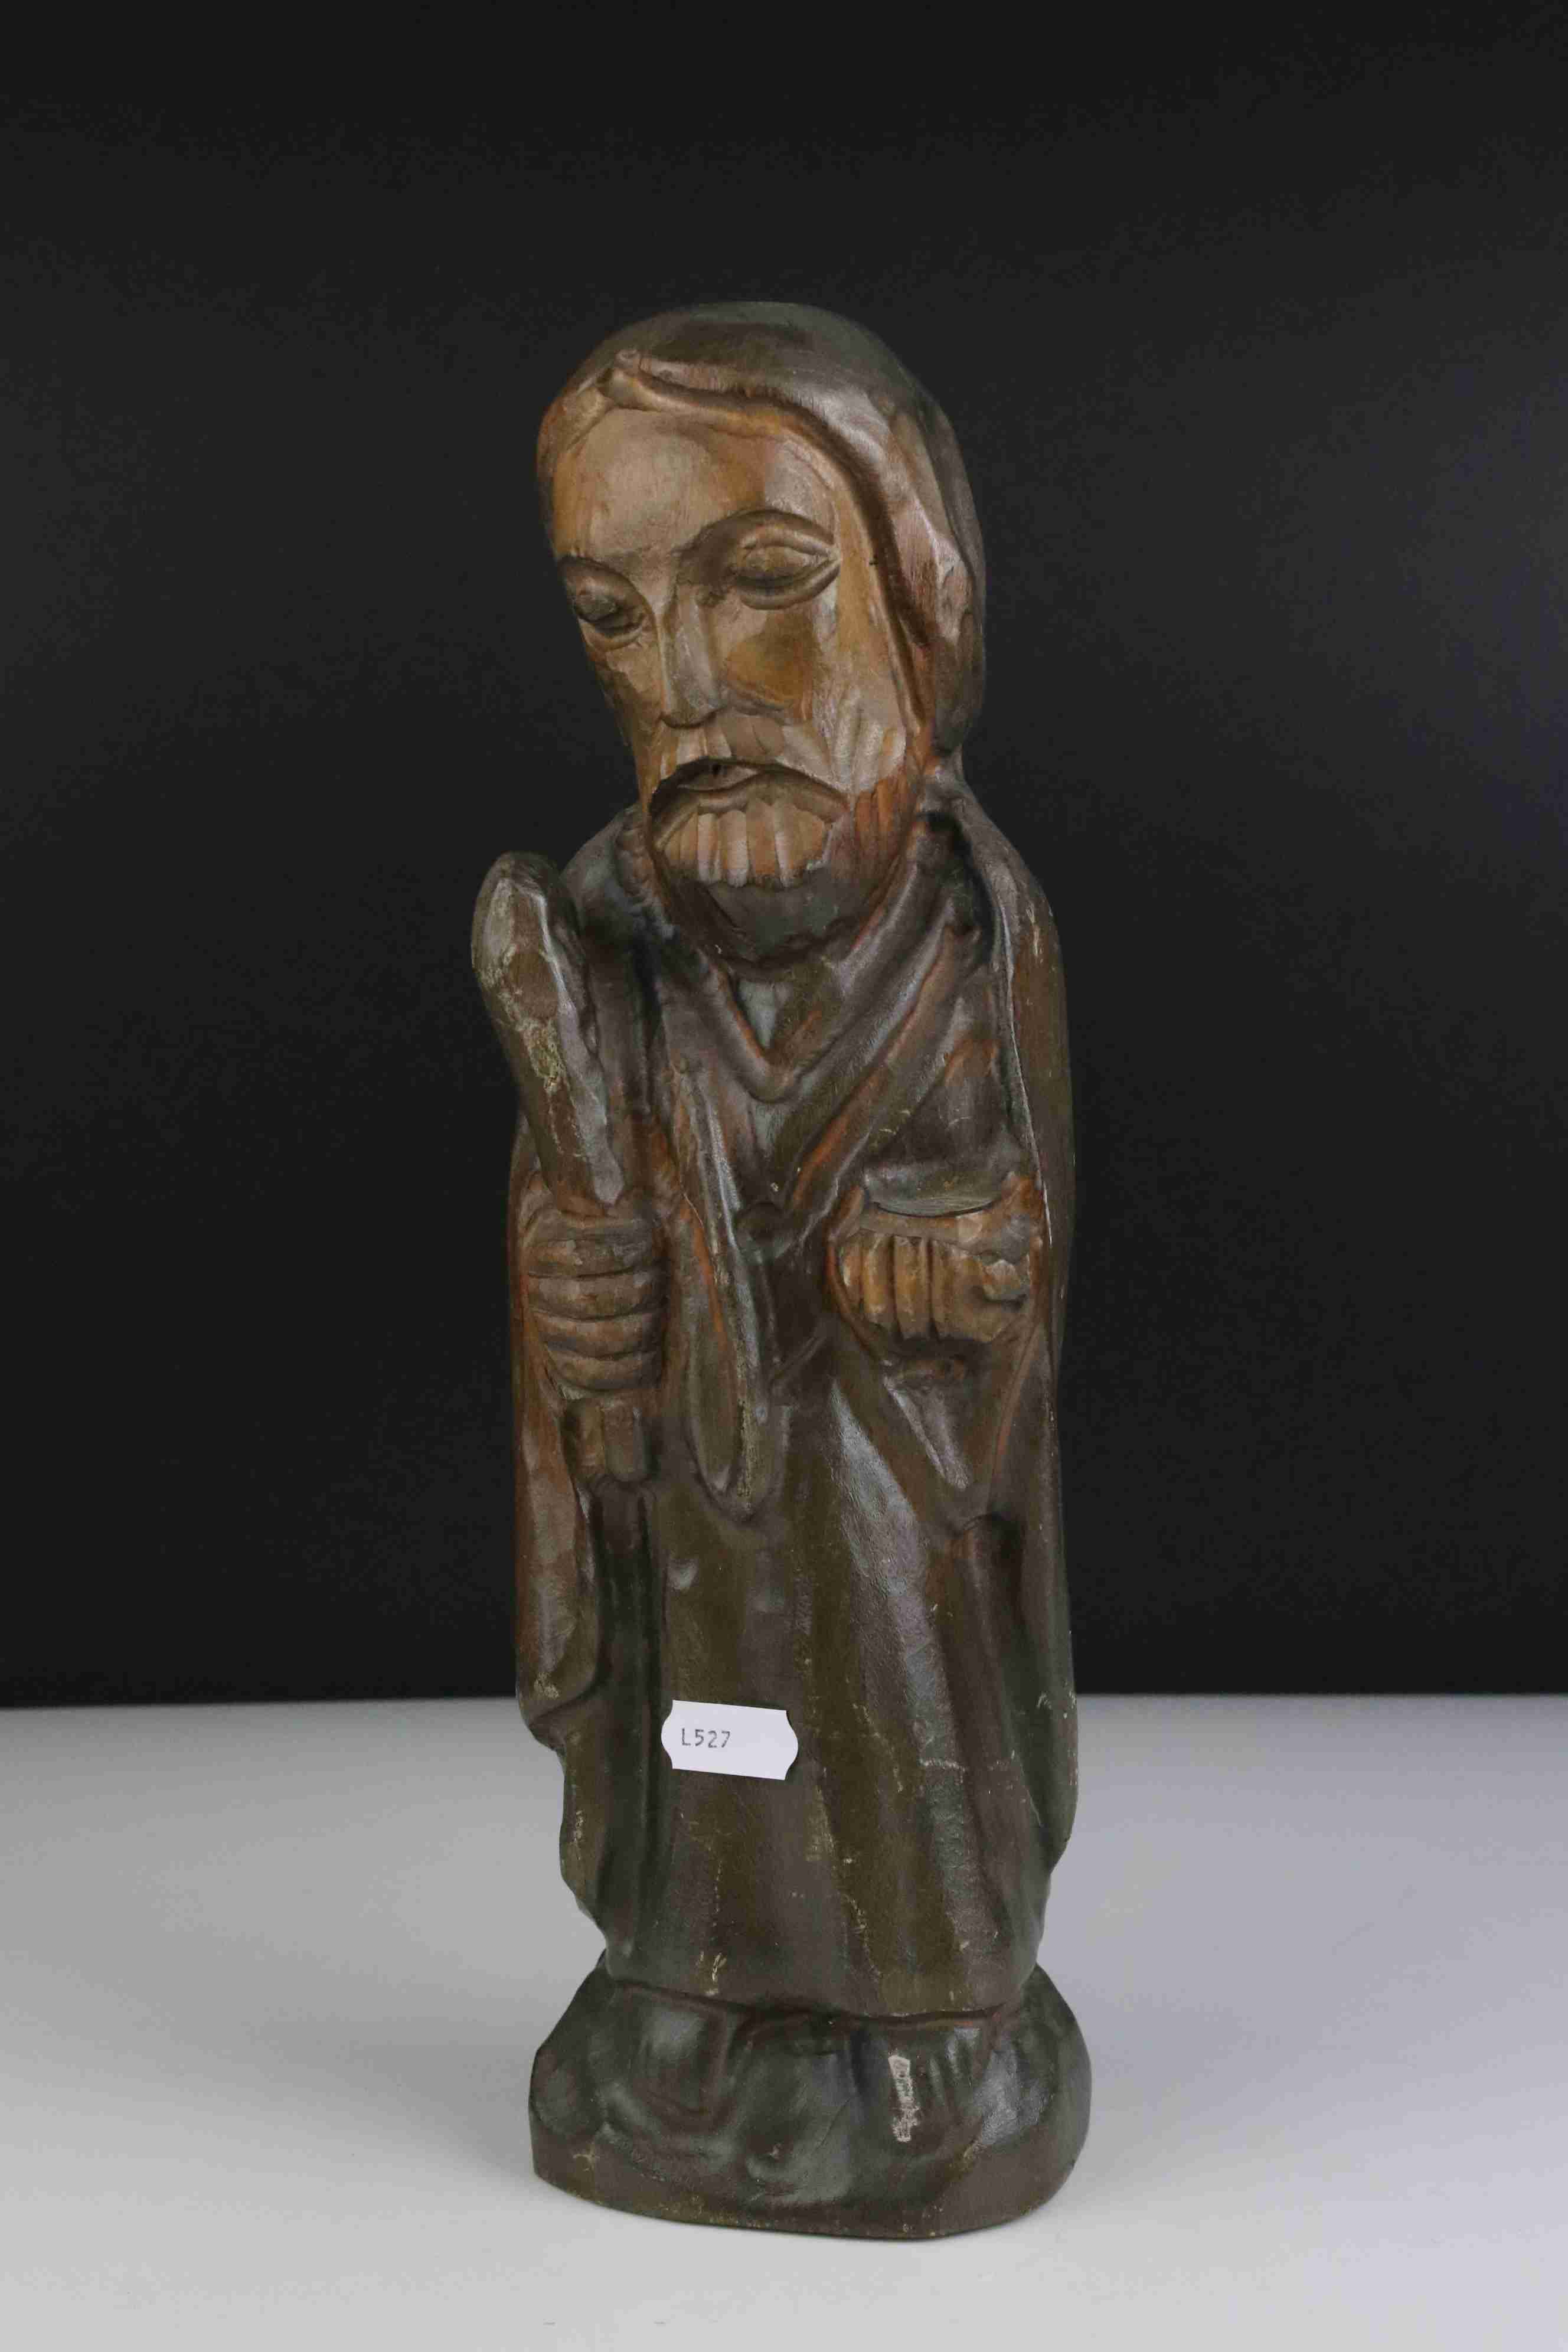 A carved wooden figure of a religious figure.